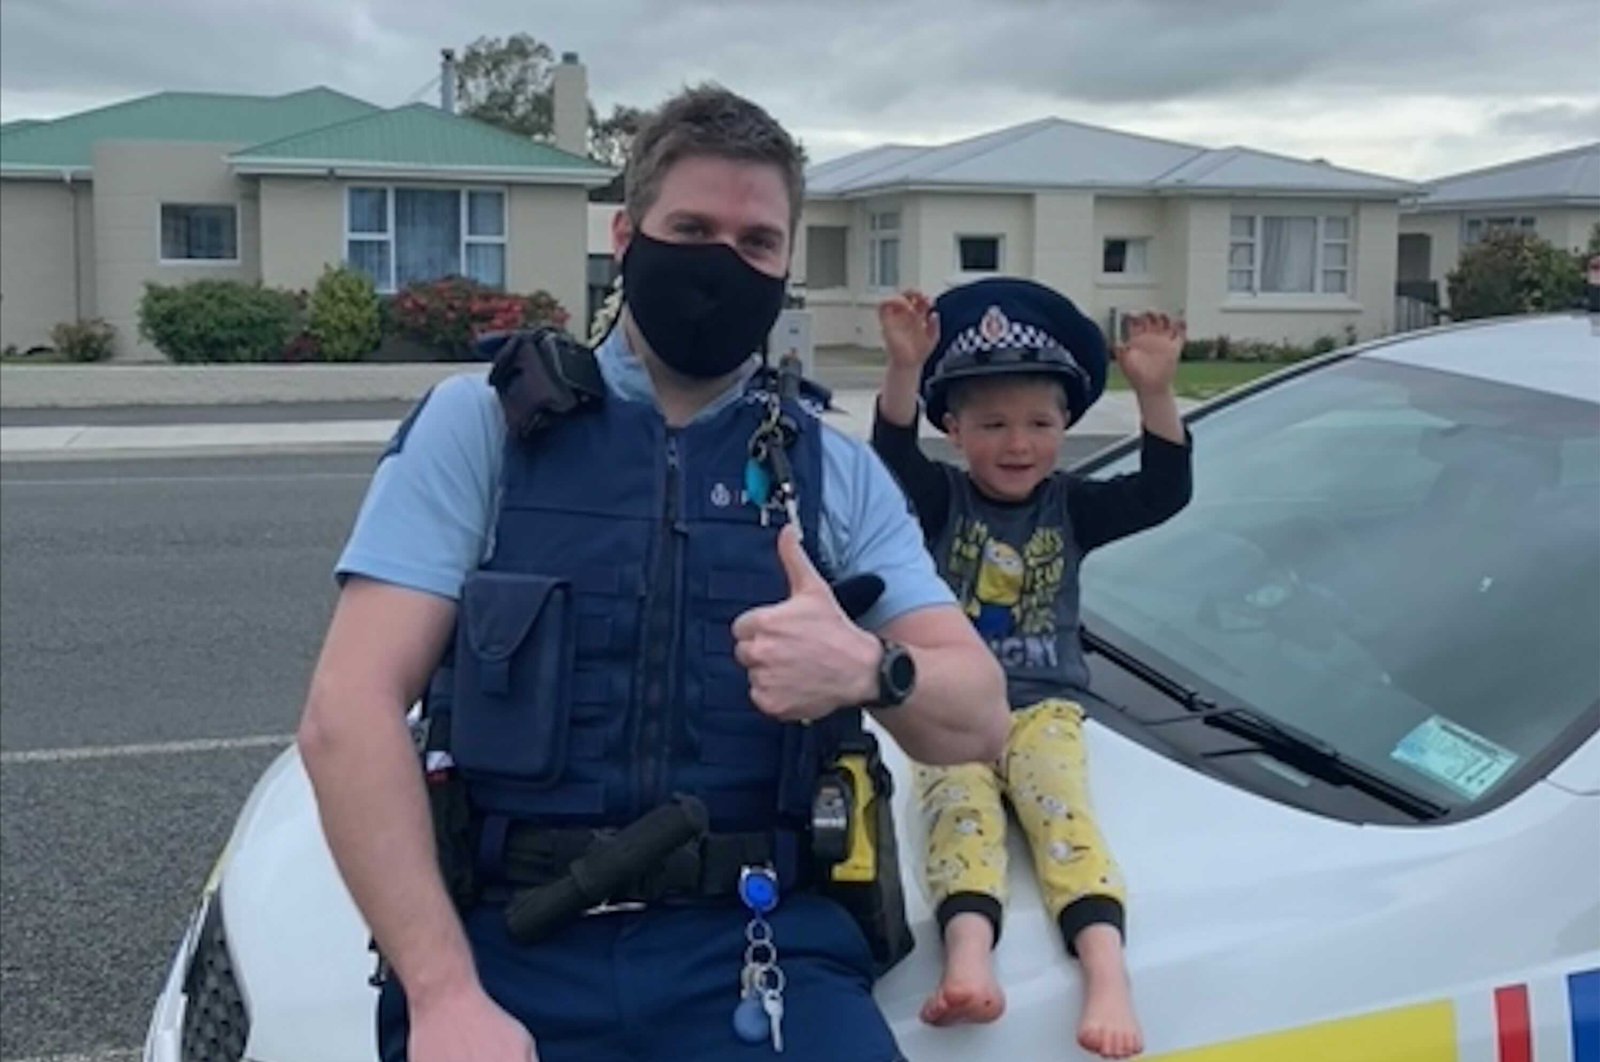 An officer identified only as Constable Kurt sits on his patrol car with a 4-year-old boy who is not identified, in the South Island city of Invercargill, New Zealand, Oct. 15, 2021. (NZ Police via AP)